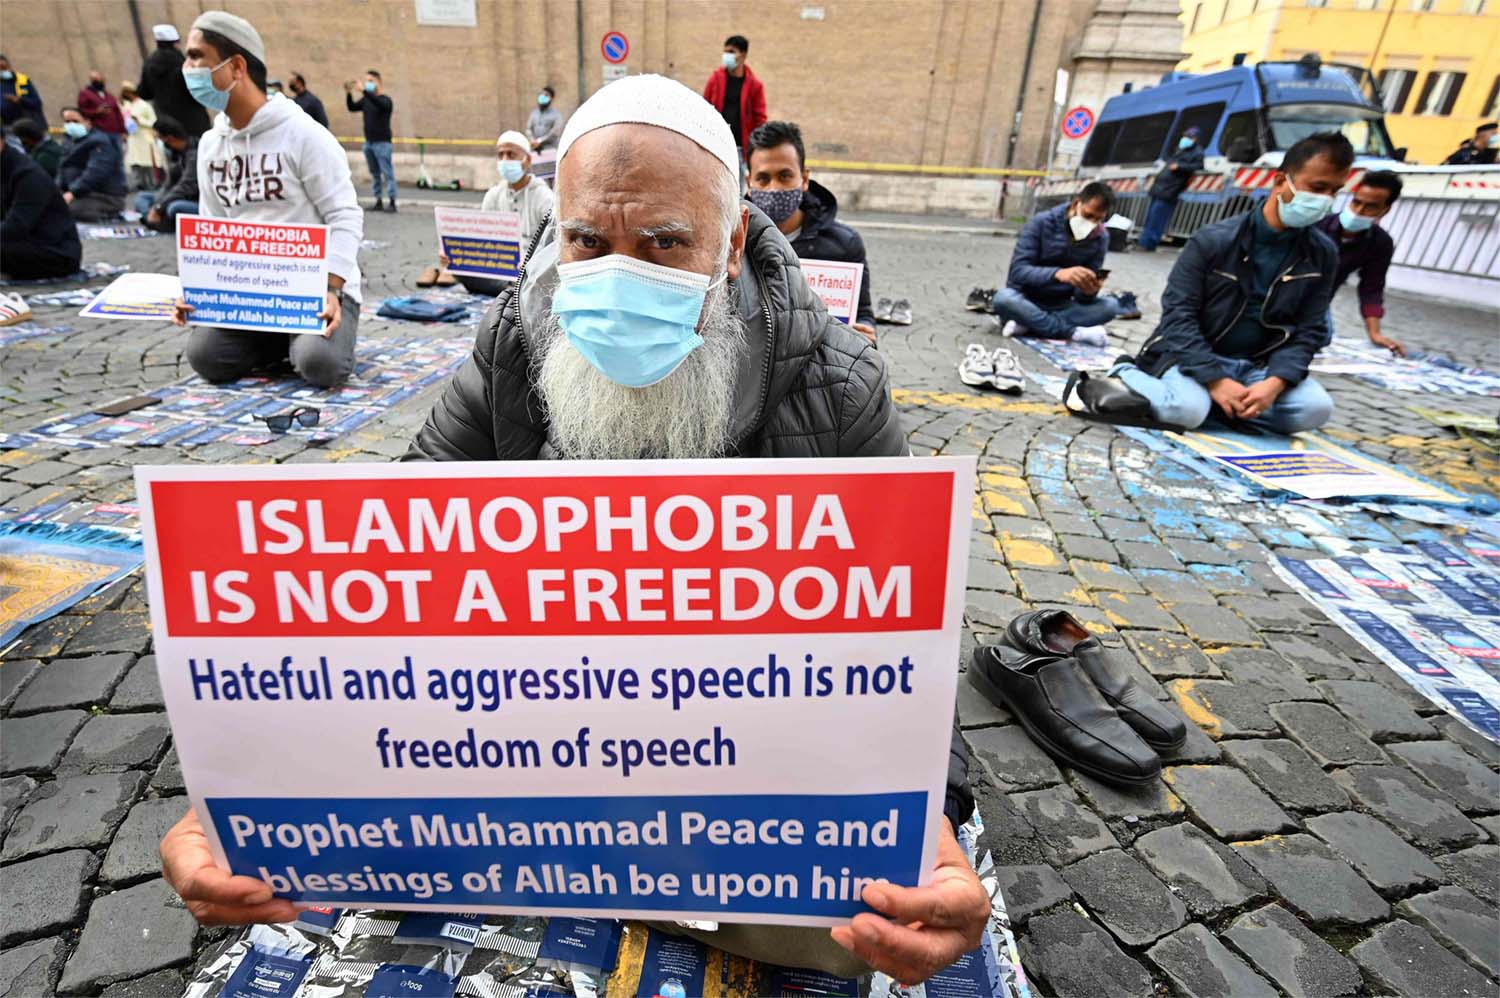 The launch of the anti-Islamophobia effort has been expected for months